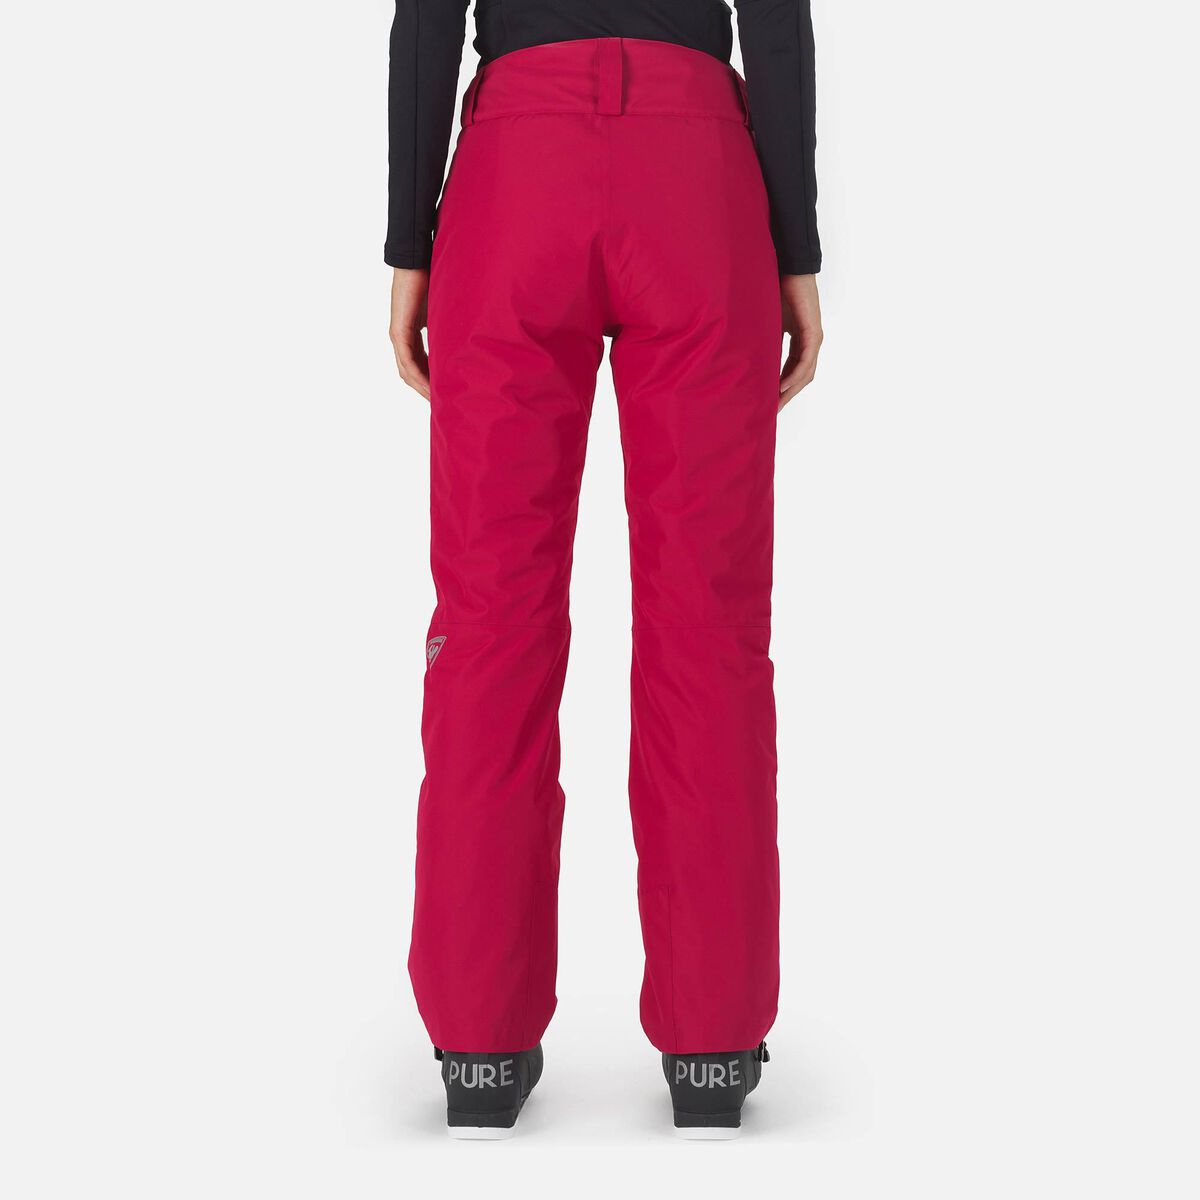 PANTALONES ESQUÍ MUJER WOMAN PANT RED FLUO